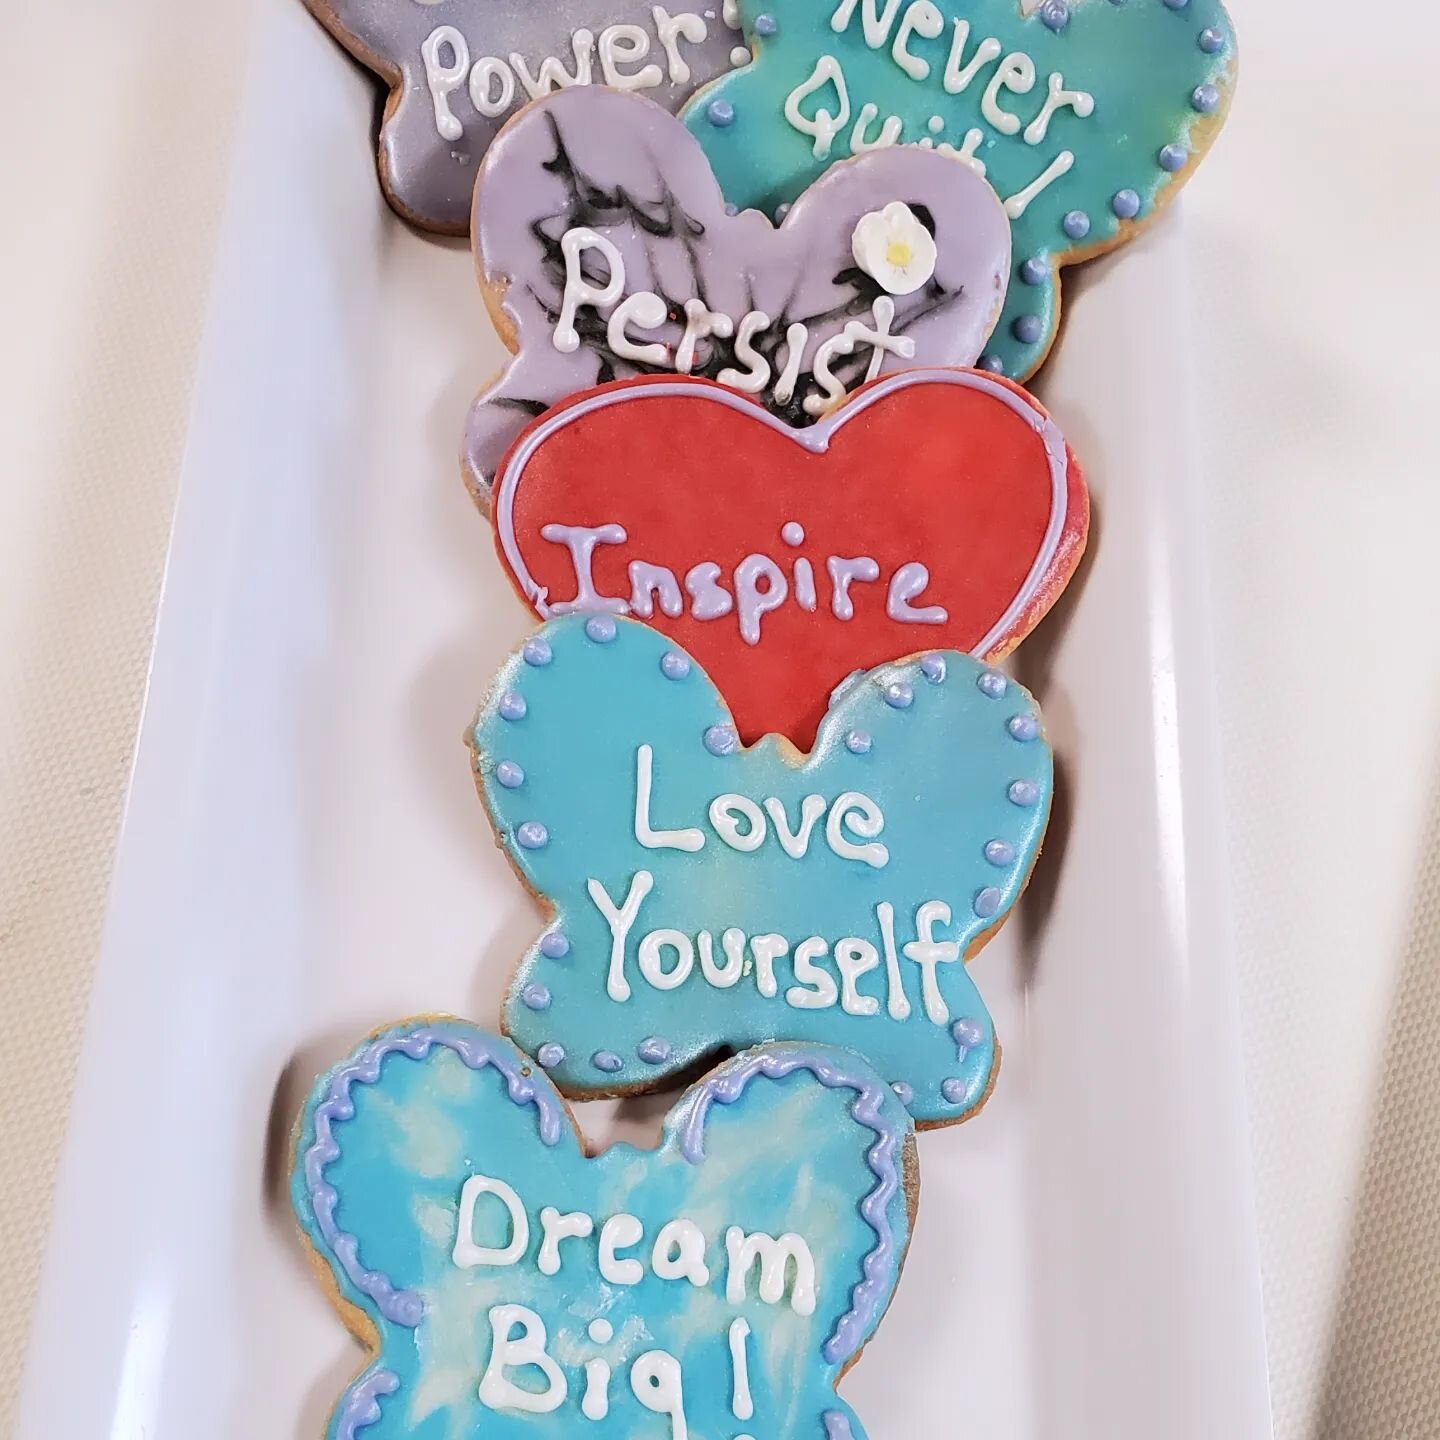 Celebrate International Women's Day with our painted cookies!  Available thru the weekend. #inspireinclusion #womenshistorymonth #IWD #march8 #equality #diversity